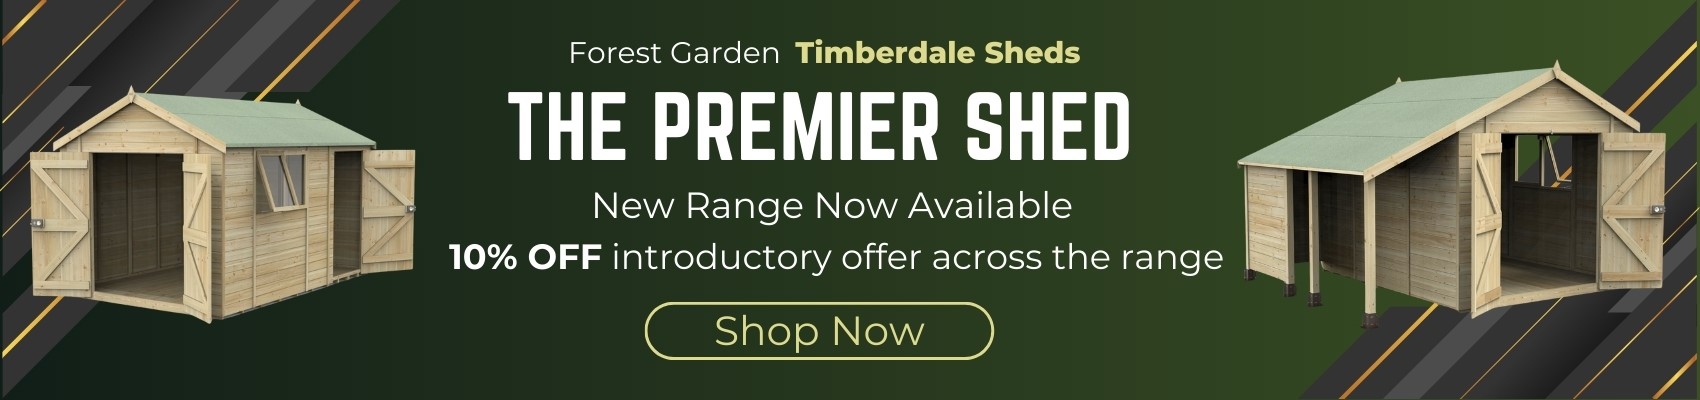 Forest Garden Timberdale Wooden Sheds - 10% Off